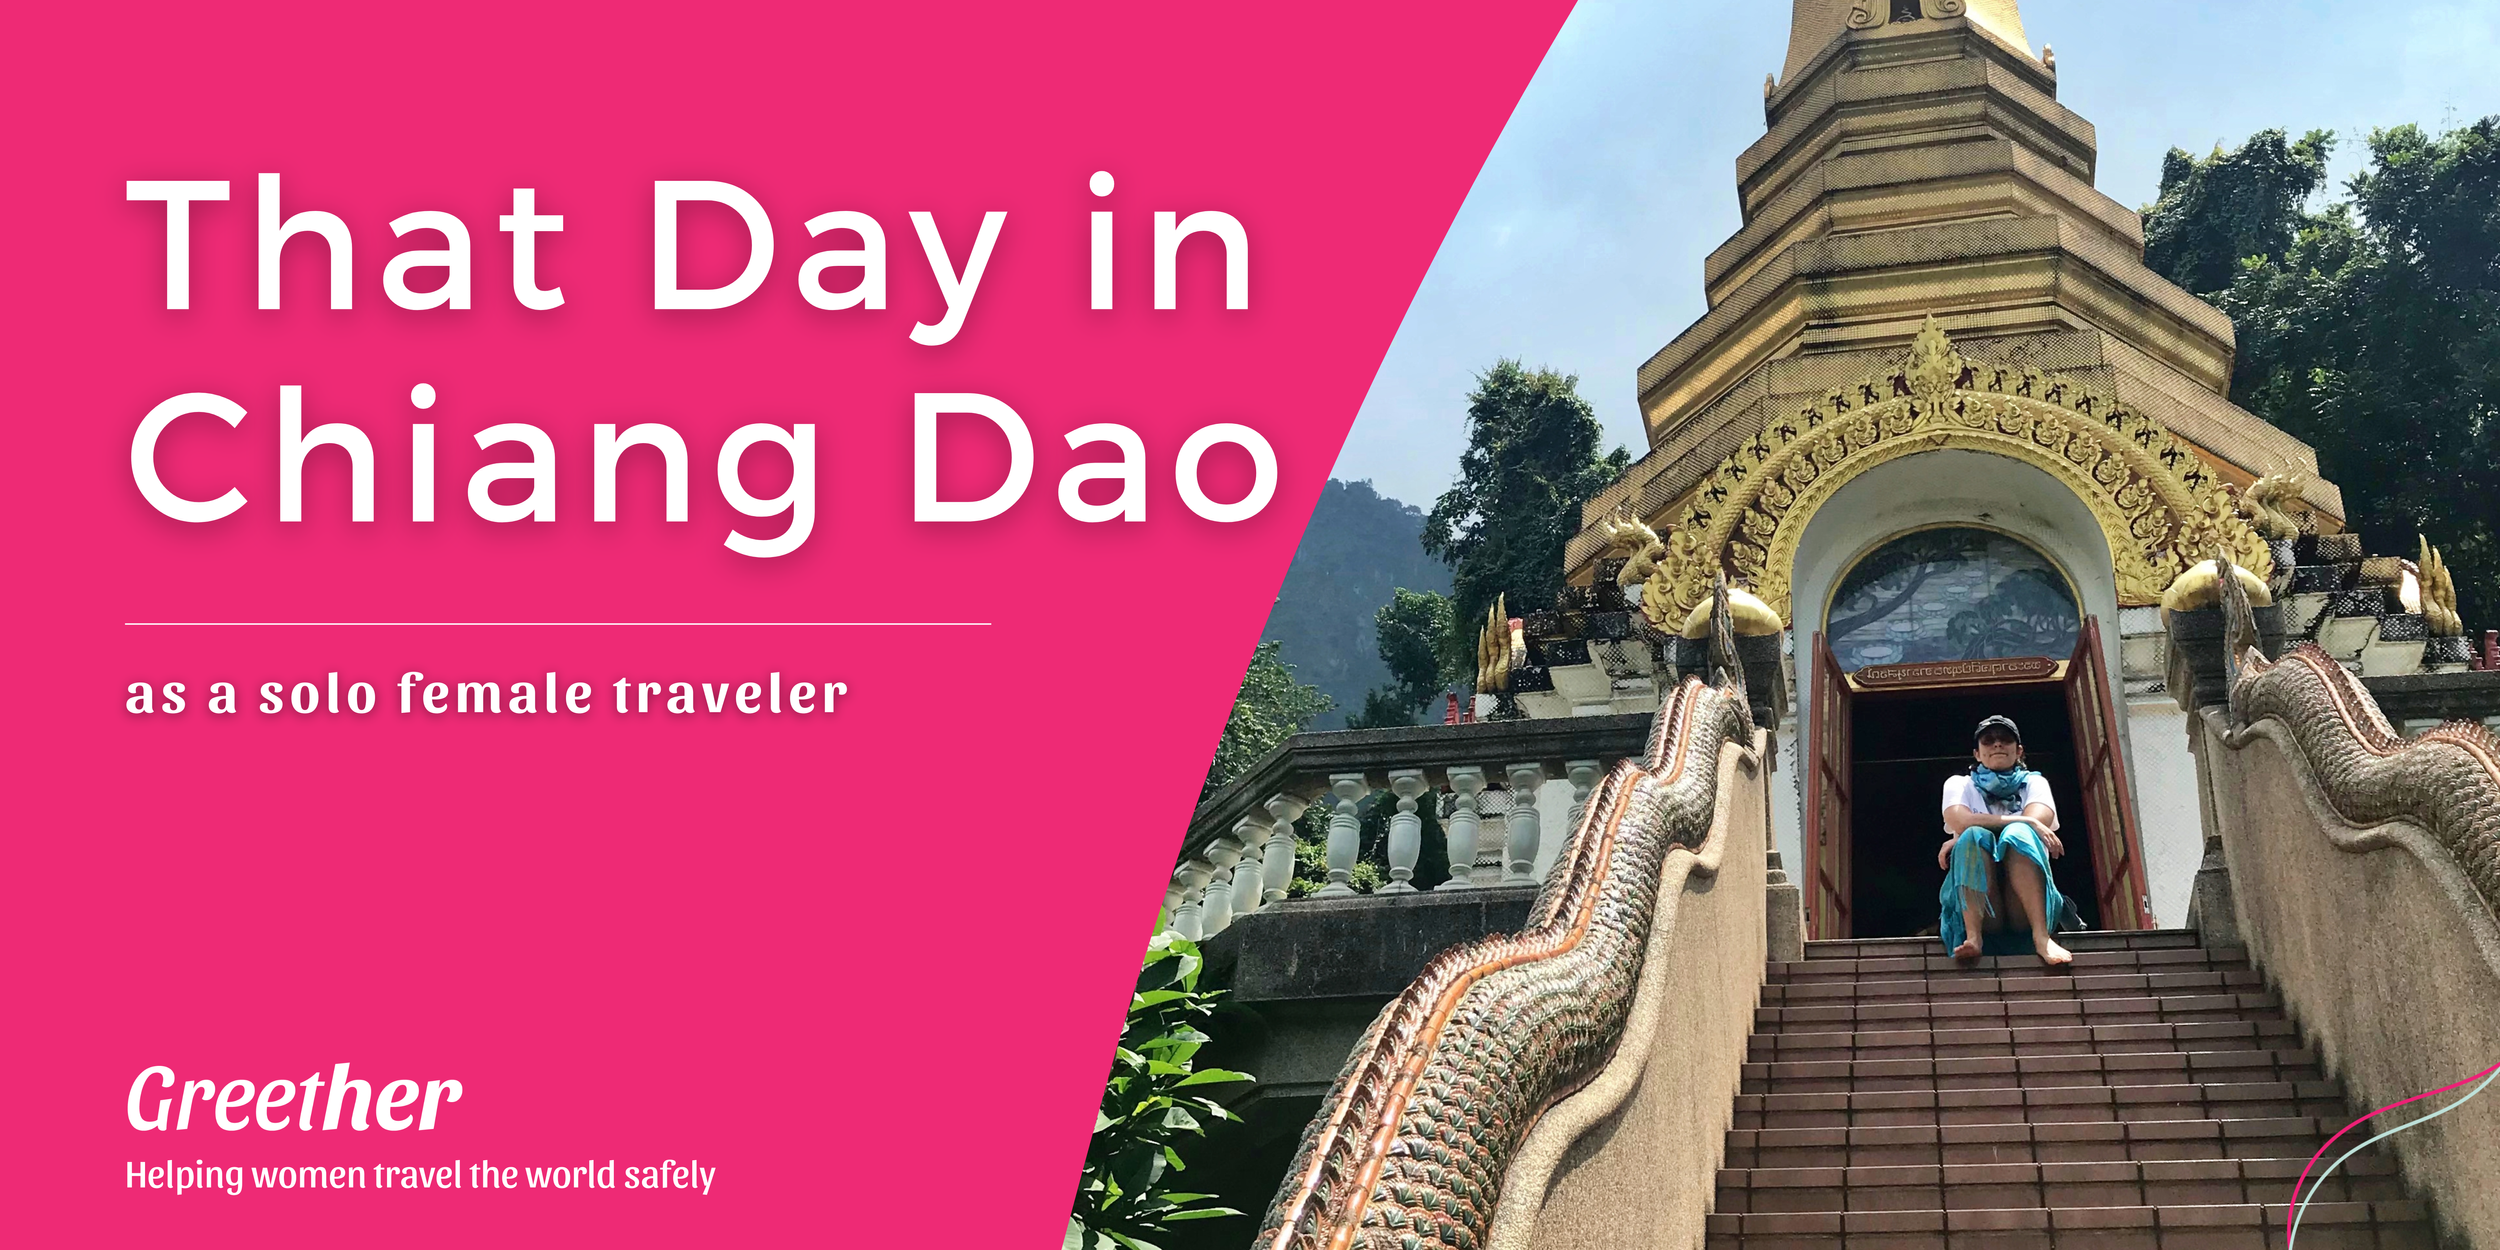 That day in Chiang Dao as a solo female traveler